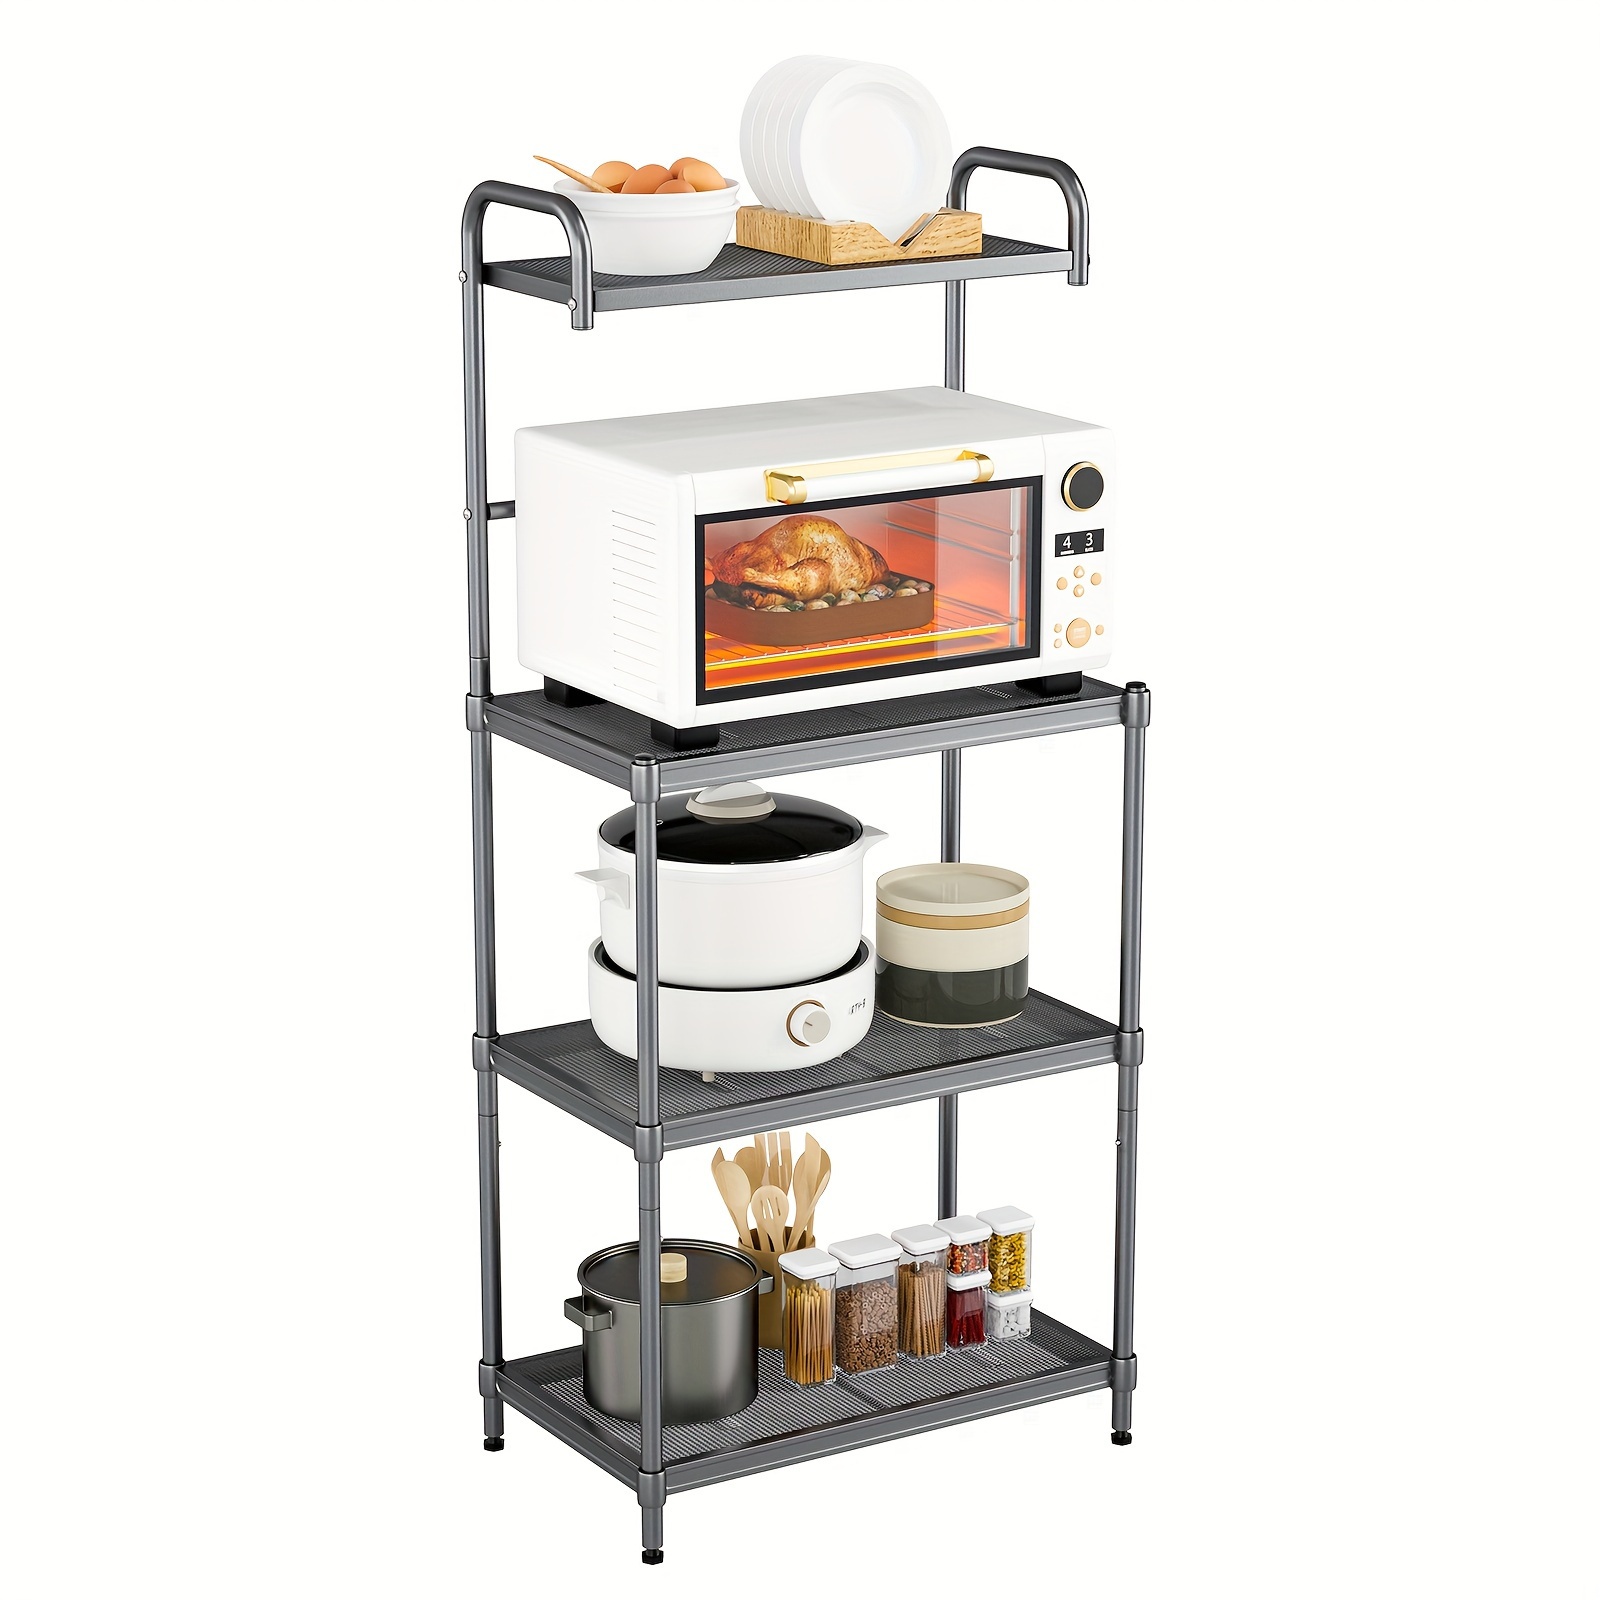 

1pc 4-tier Metal Baker's Rack Microwave Oven Stand With Storage Shelves, 22"x13.5"x53.5" Kitchen Organizer Shelf